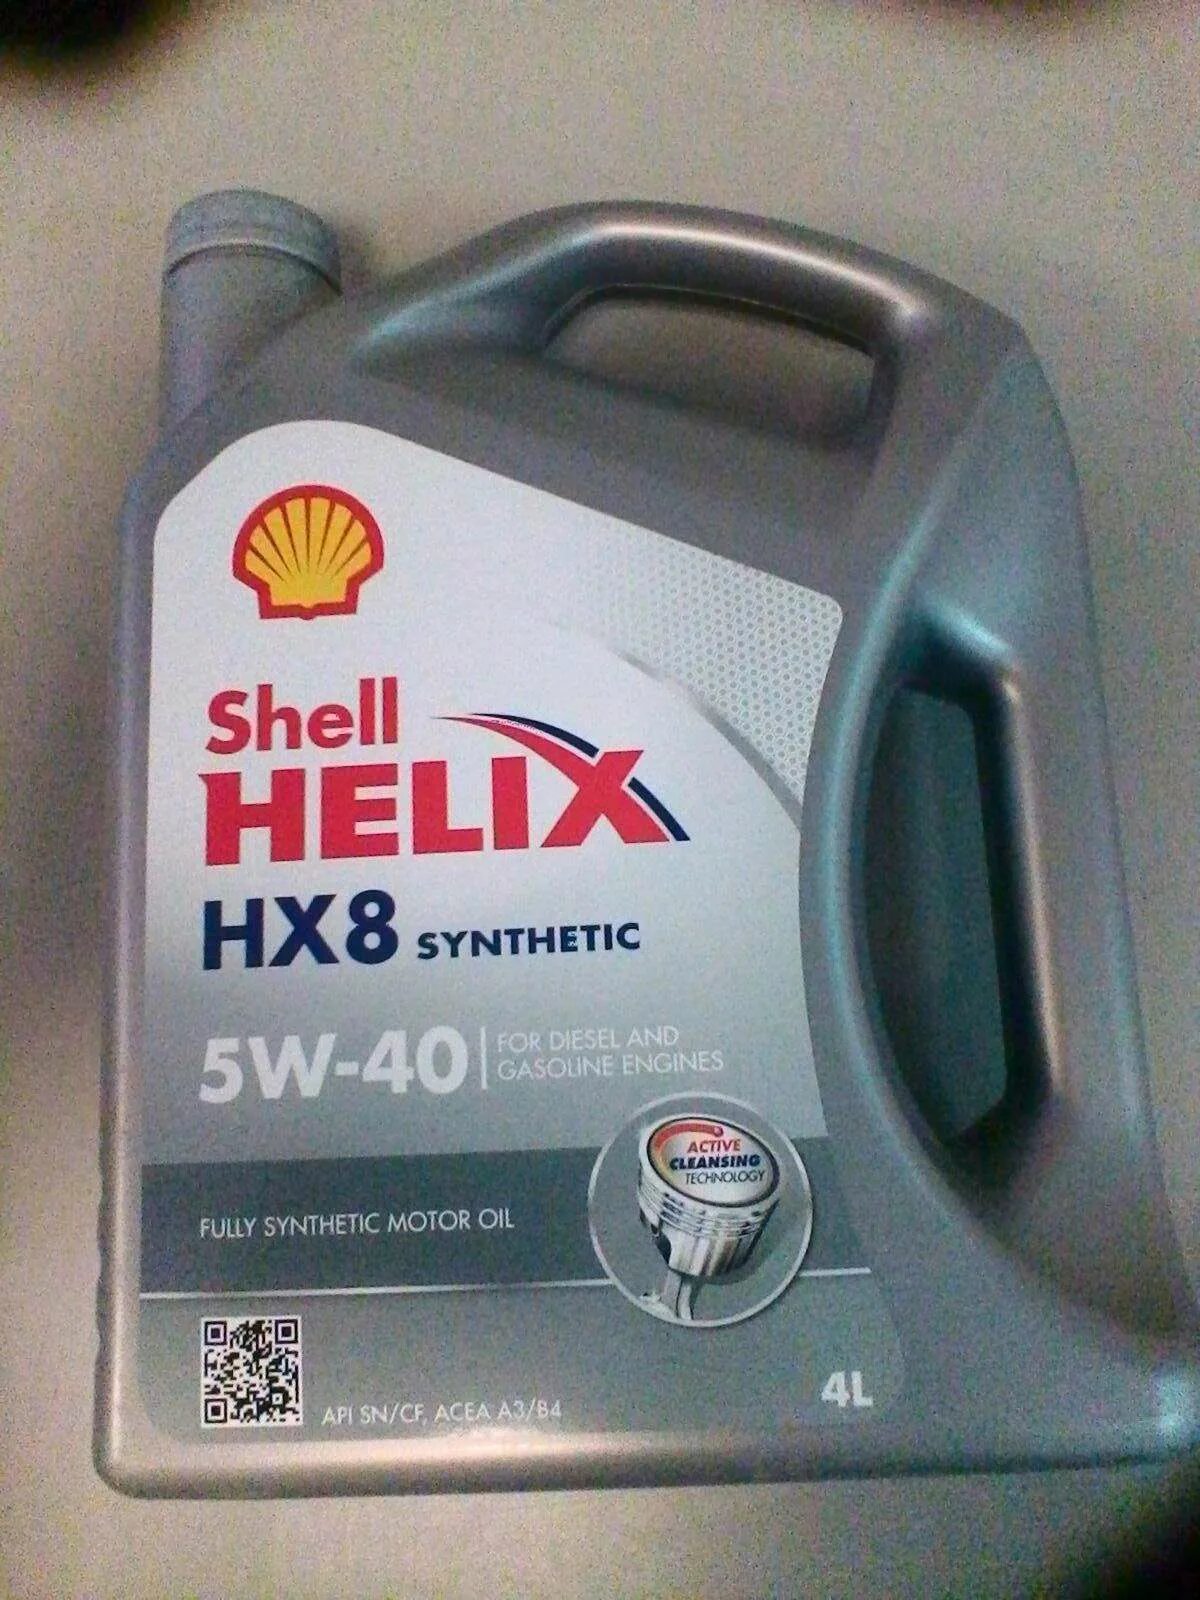 Масло shell helix hx8 5w 40. Масло моторное Shell Helix hx8. Масло Шелл Хеликс hx8 5w40. Масло моторное Shell 550040295. Шелл Хеликс 5 40 hx8.